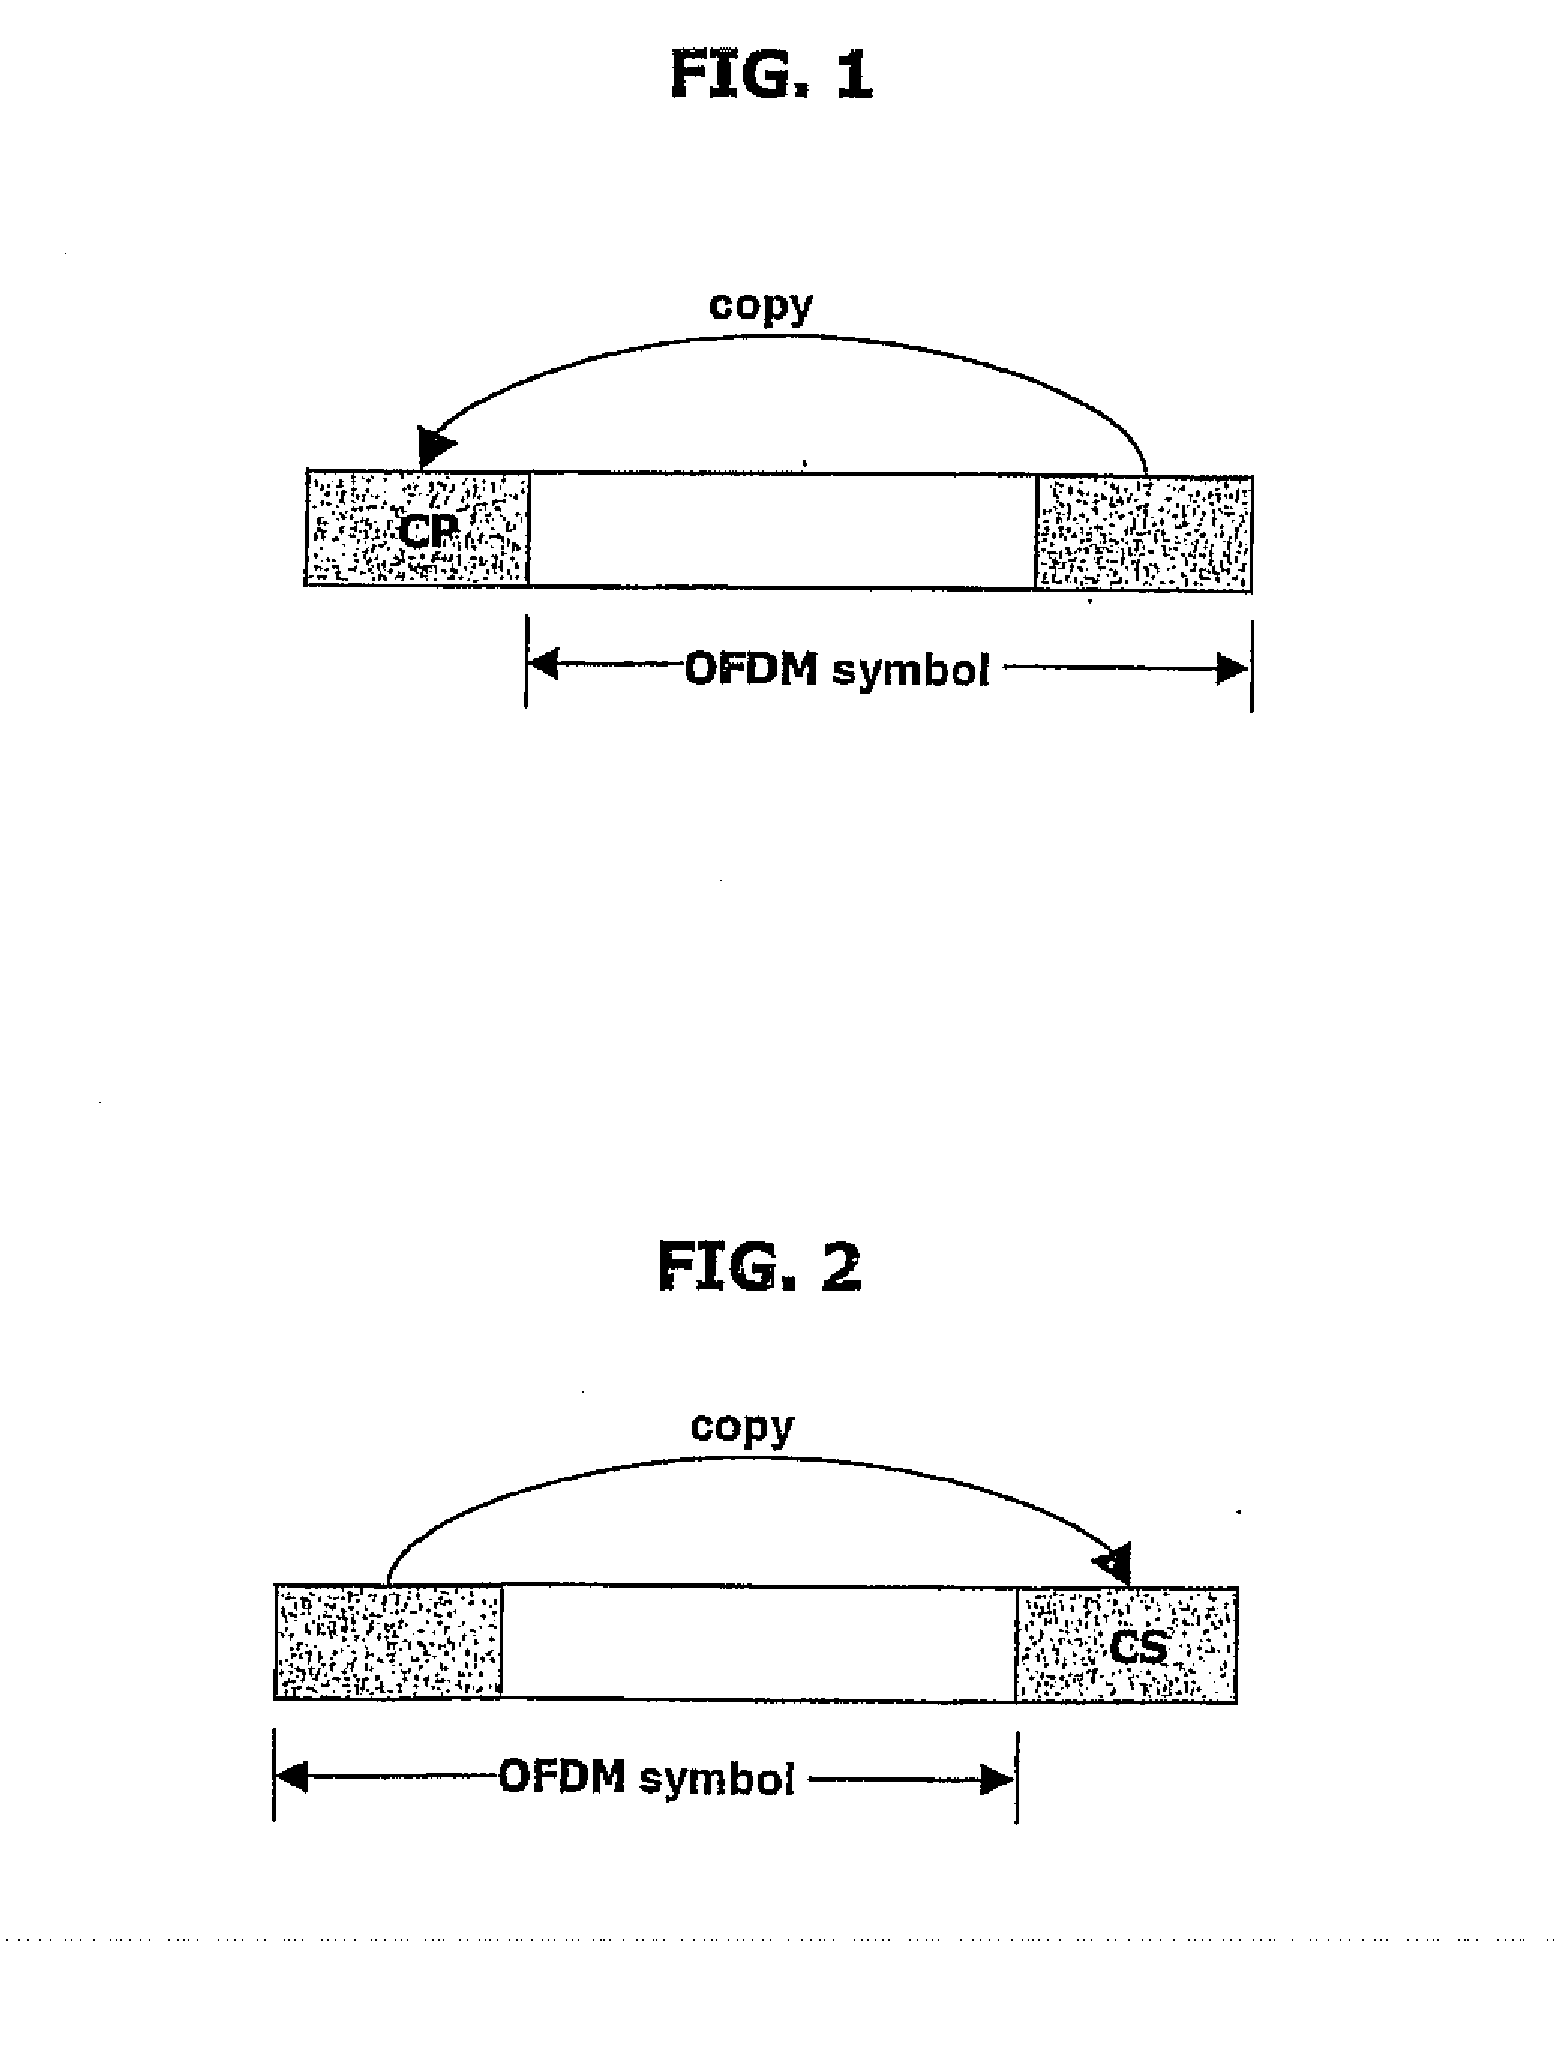 Method for Detecting Ofdm Timing in Ofdm System